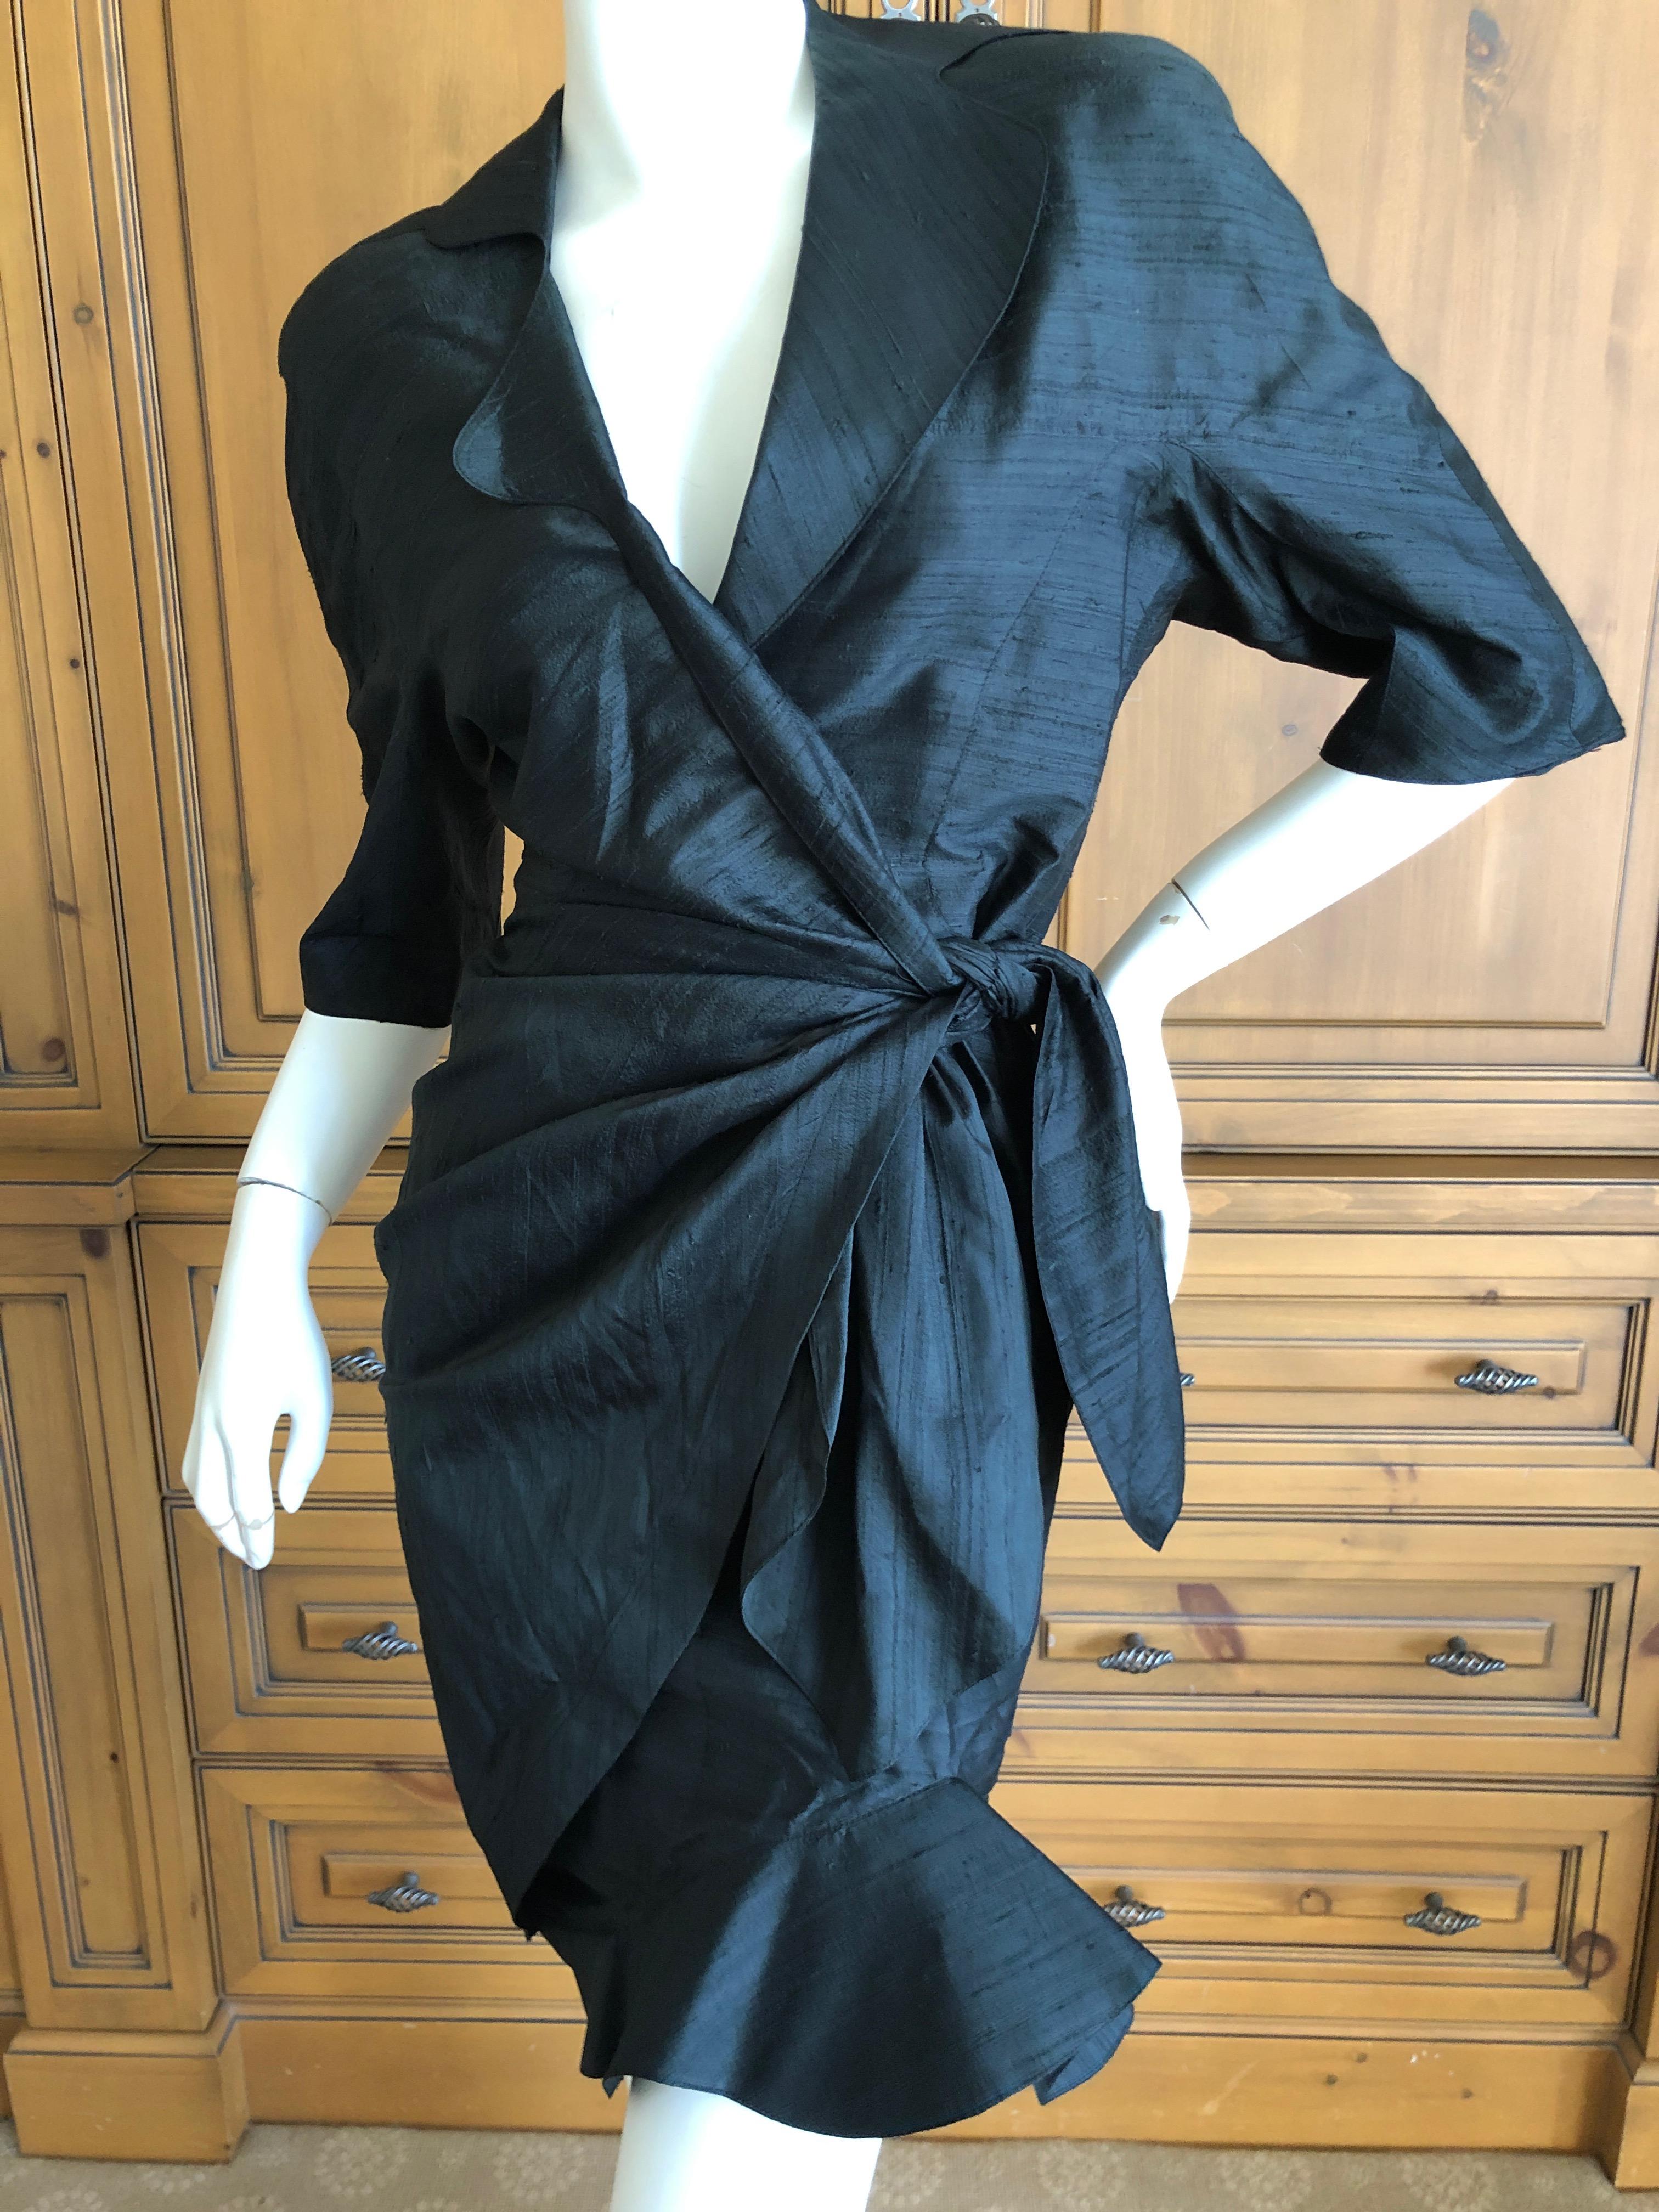 Thierry Mugler Vintage 1980's Dupioni Silk Little Black Dress.
Snaps closed inside, and then ties with two ties at the side
This is from the Thierry Mugler Fete collection, the fabric and size tag in Japanese only.
Classic Mugler
Bust 39